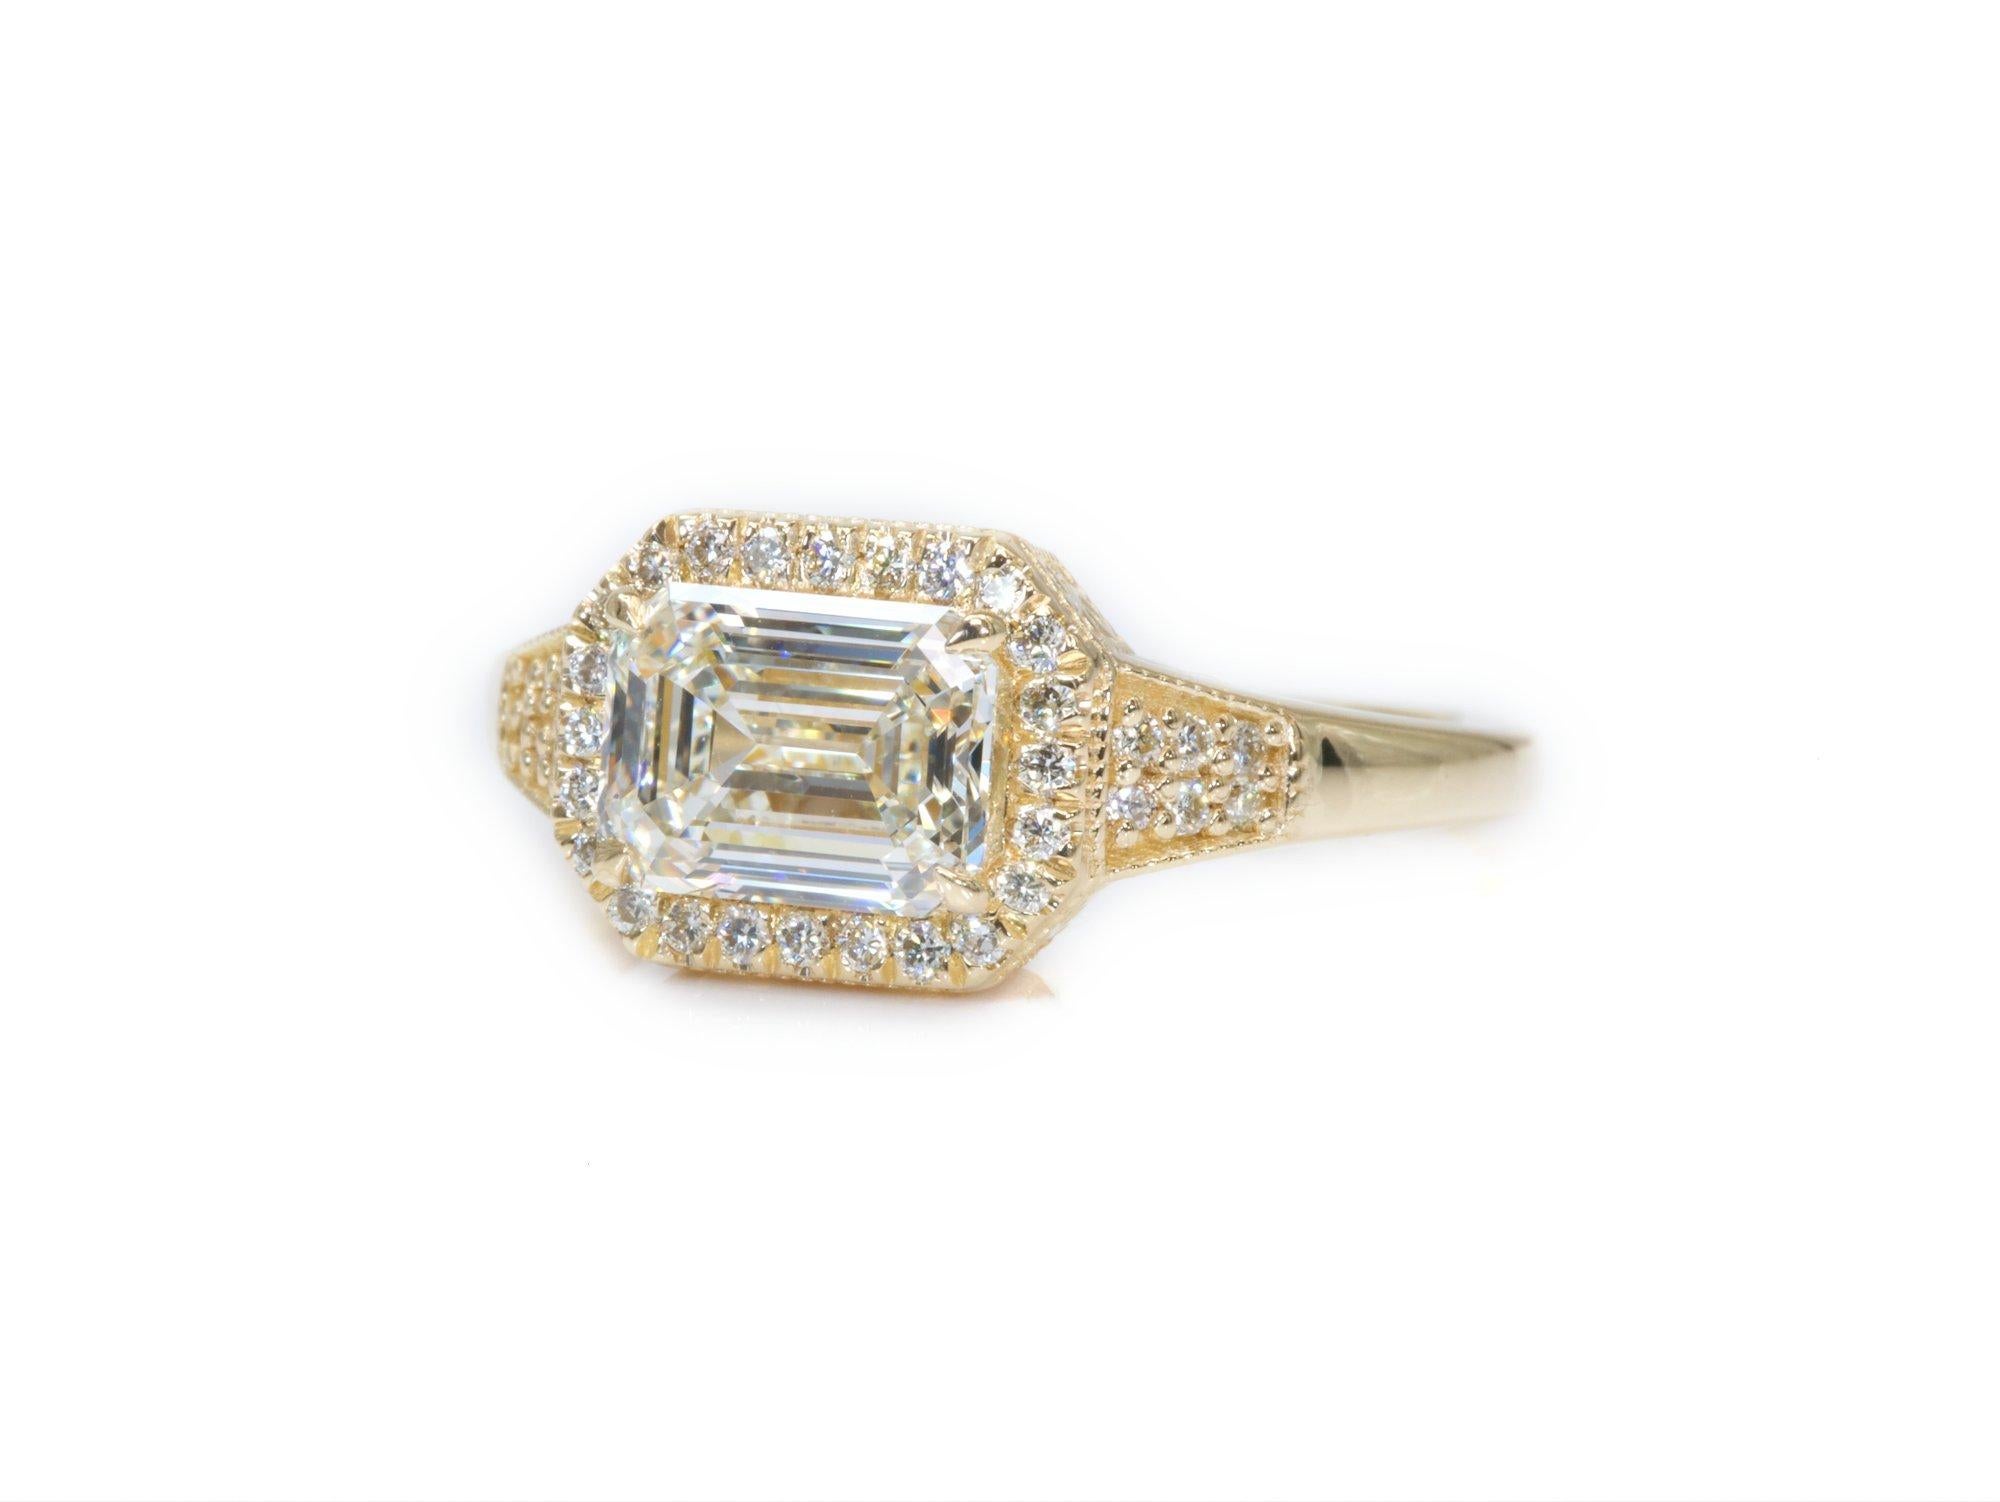 Women's Classic 18K Yellow Gold Ring with 1.67 Ct Natural Diamonds, AIG Certificate For Sale